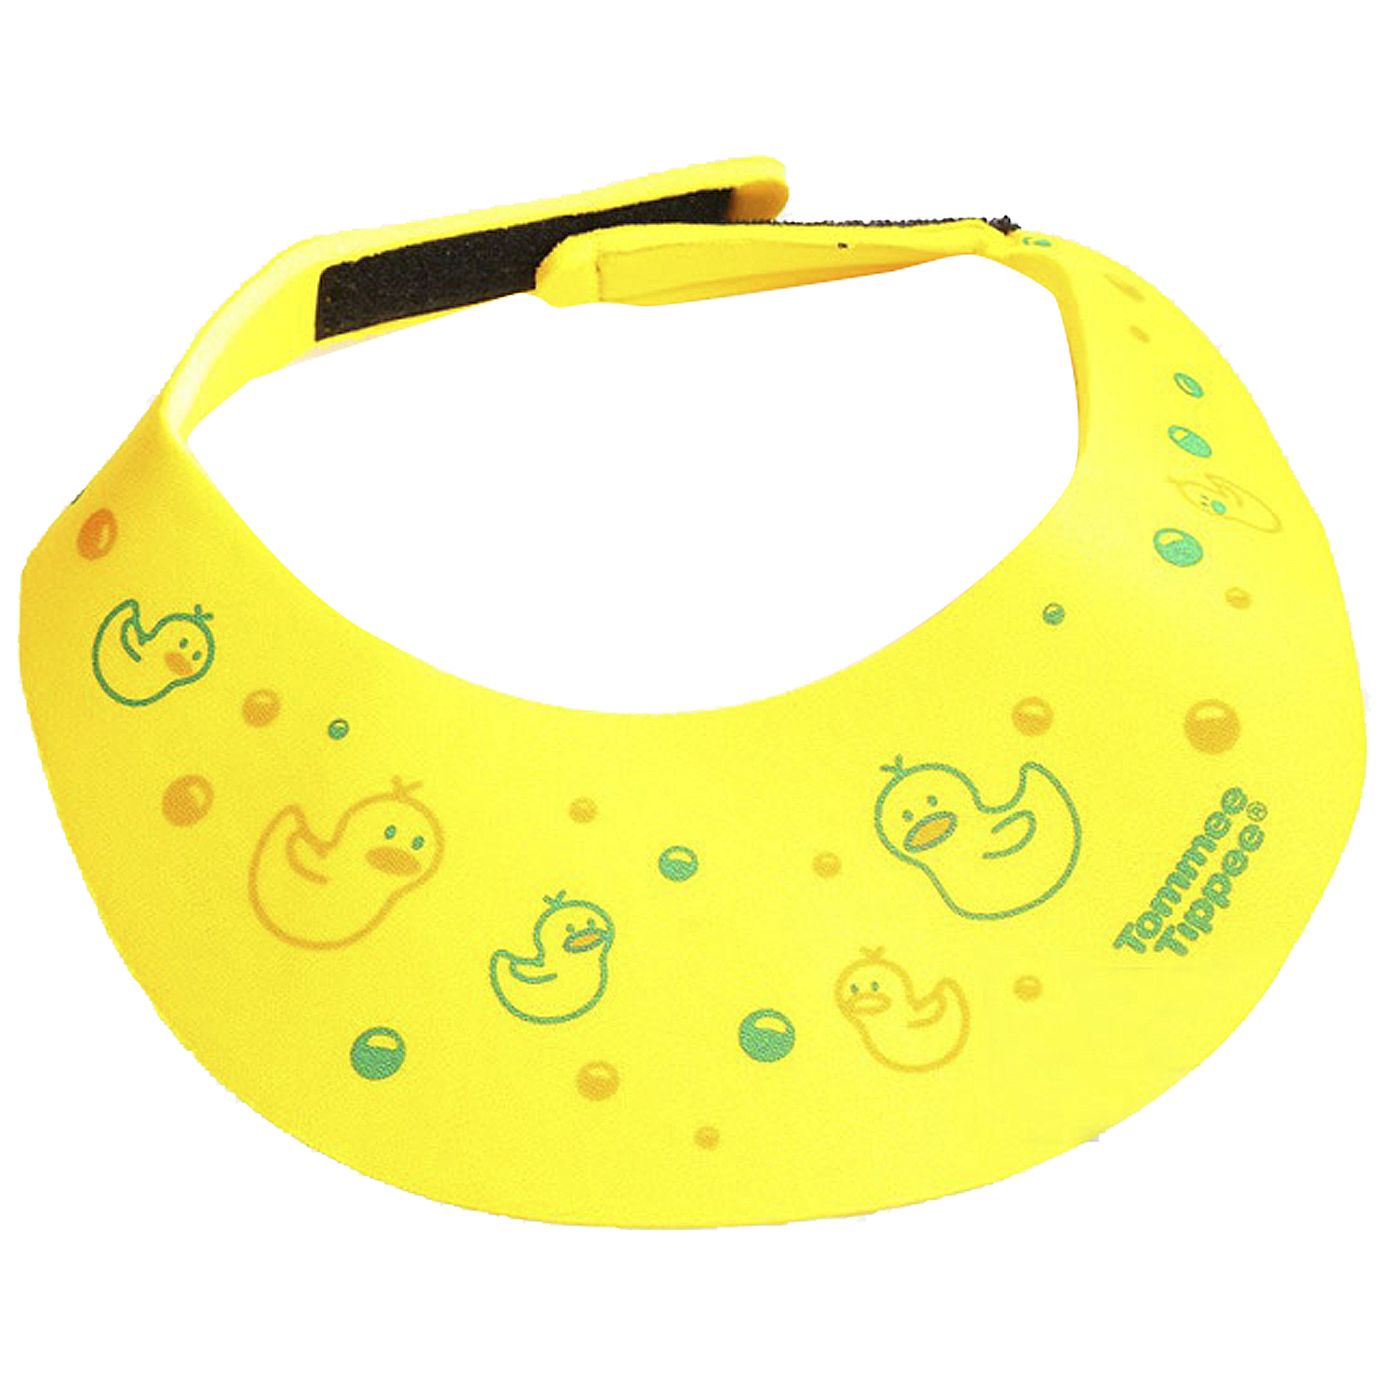 Tommee Tippee Shampoo Shield with Printing Yellow - 2